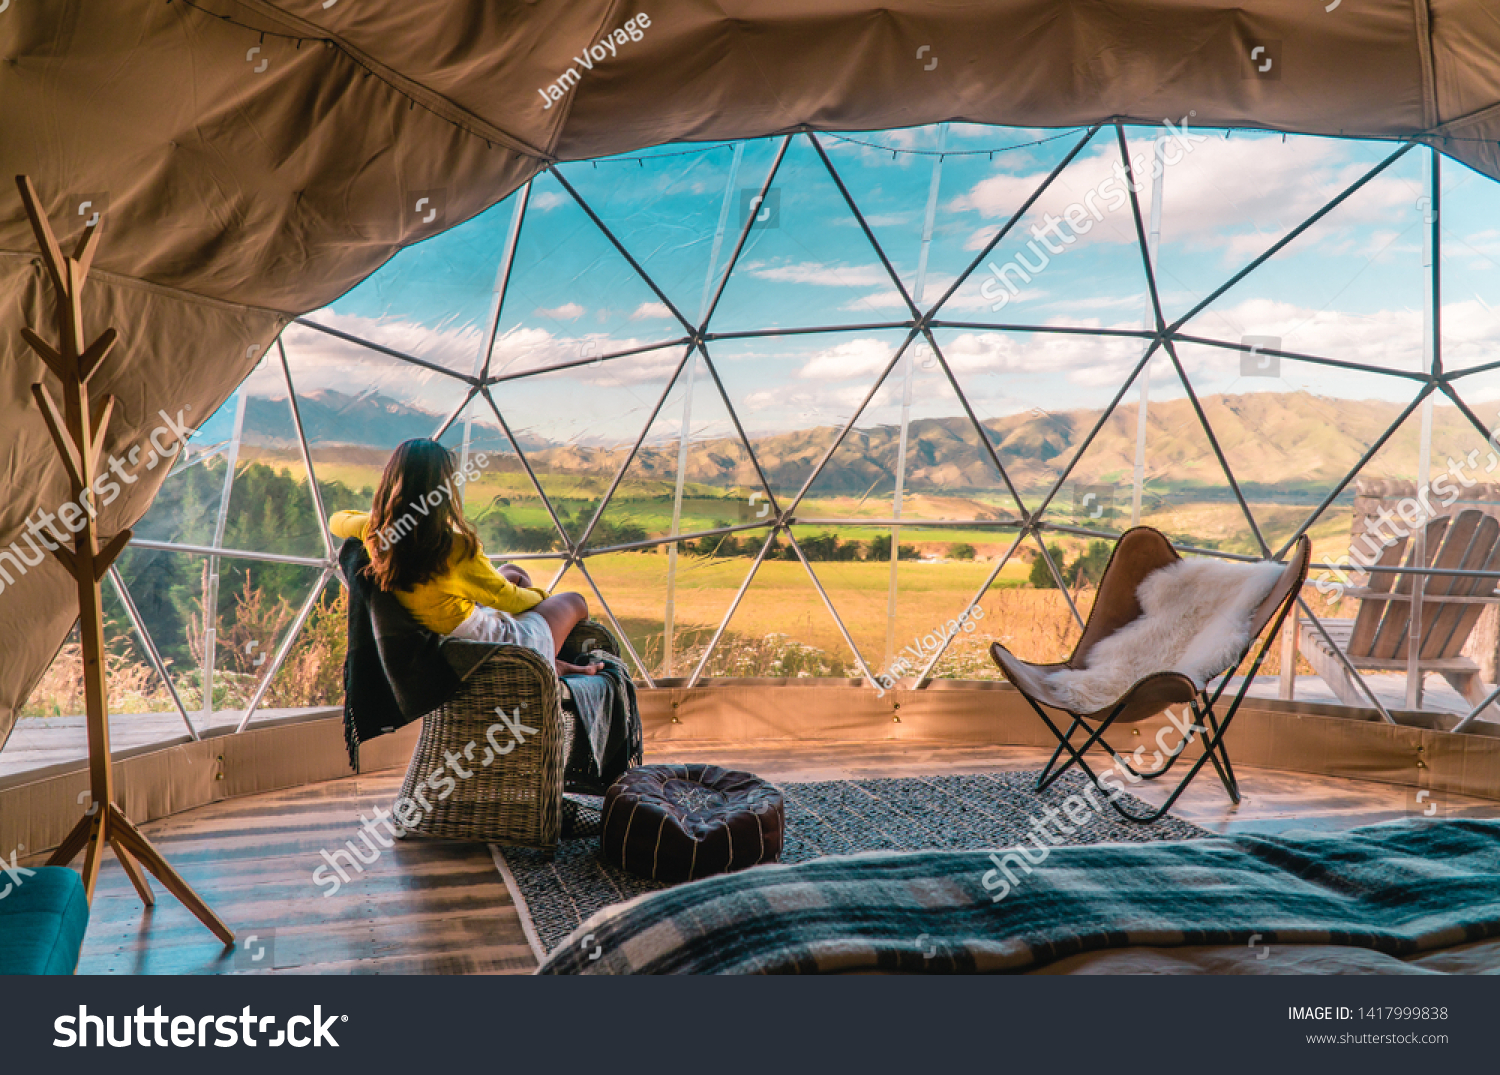 Woman looking out at nature from geo dome tents. Green, blue, orange background. Cozy, camping, glamping, holiday, vacation lifestyle concept. Outdoors cabin, scenic background. New Zealand. #1417999838